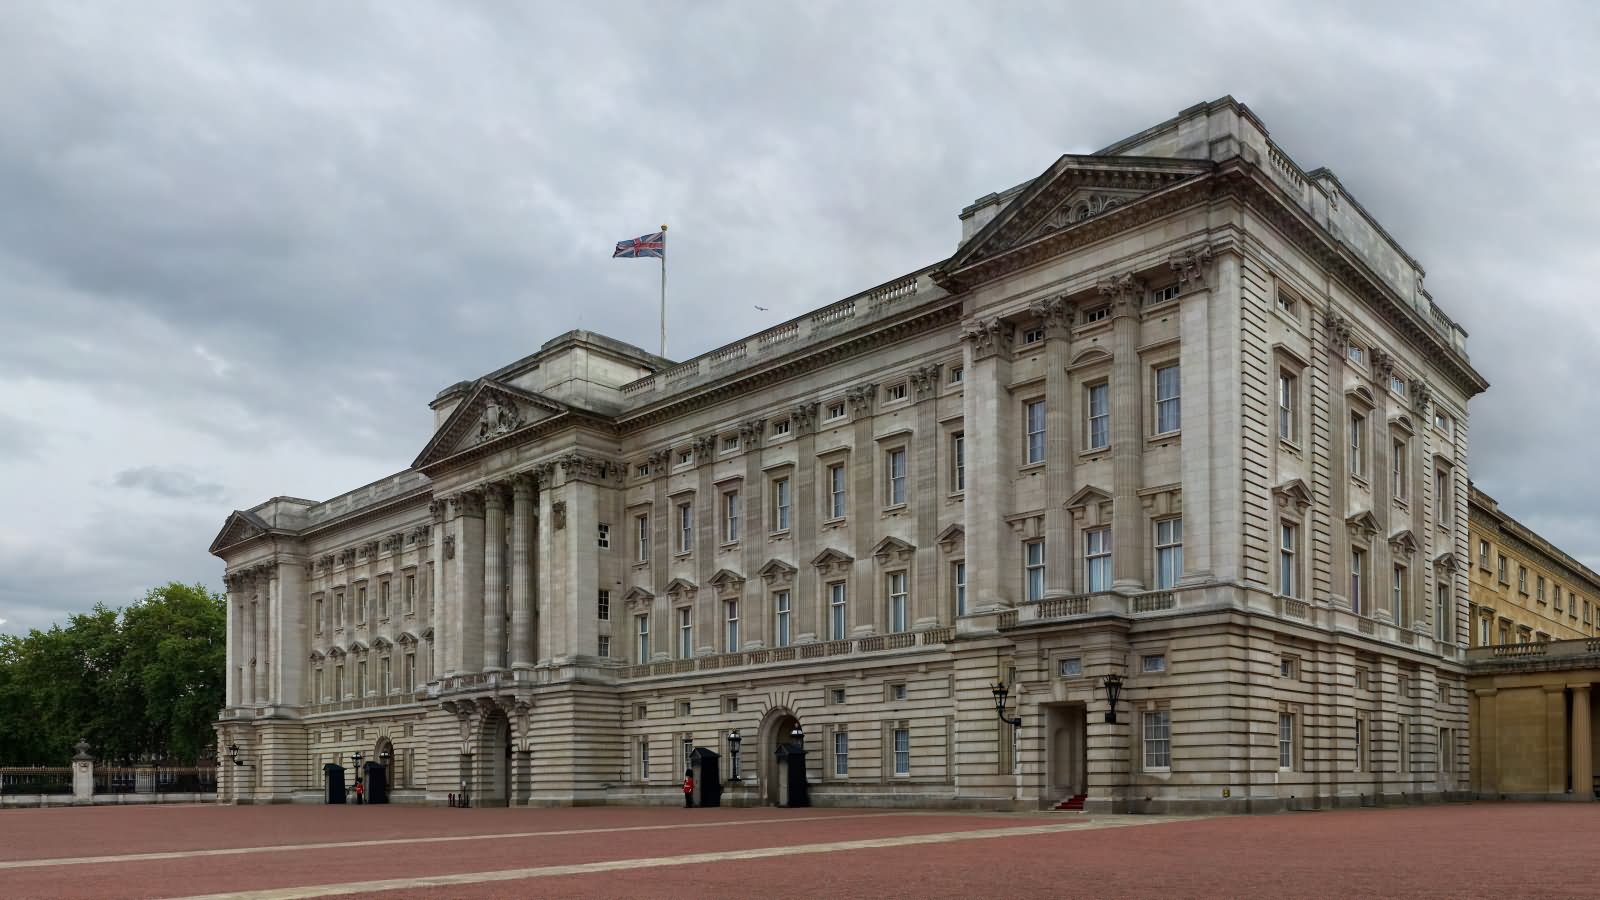 The East Front Of The Buckingham Palace